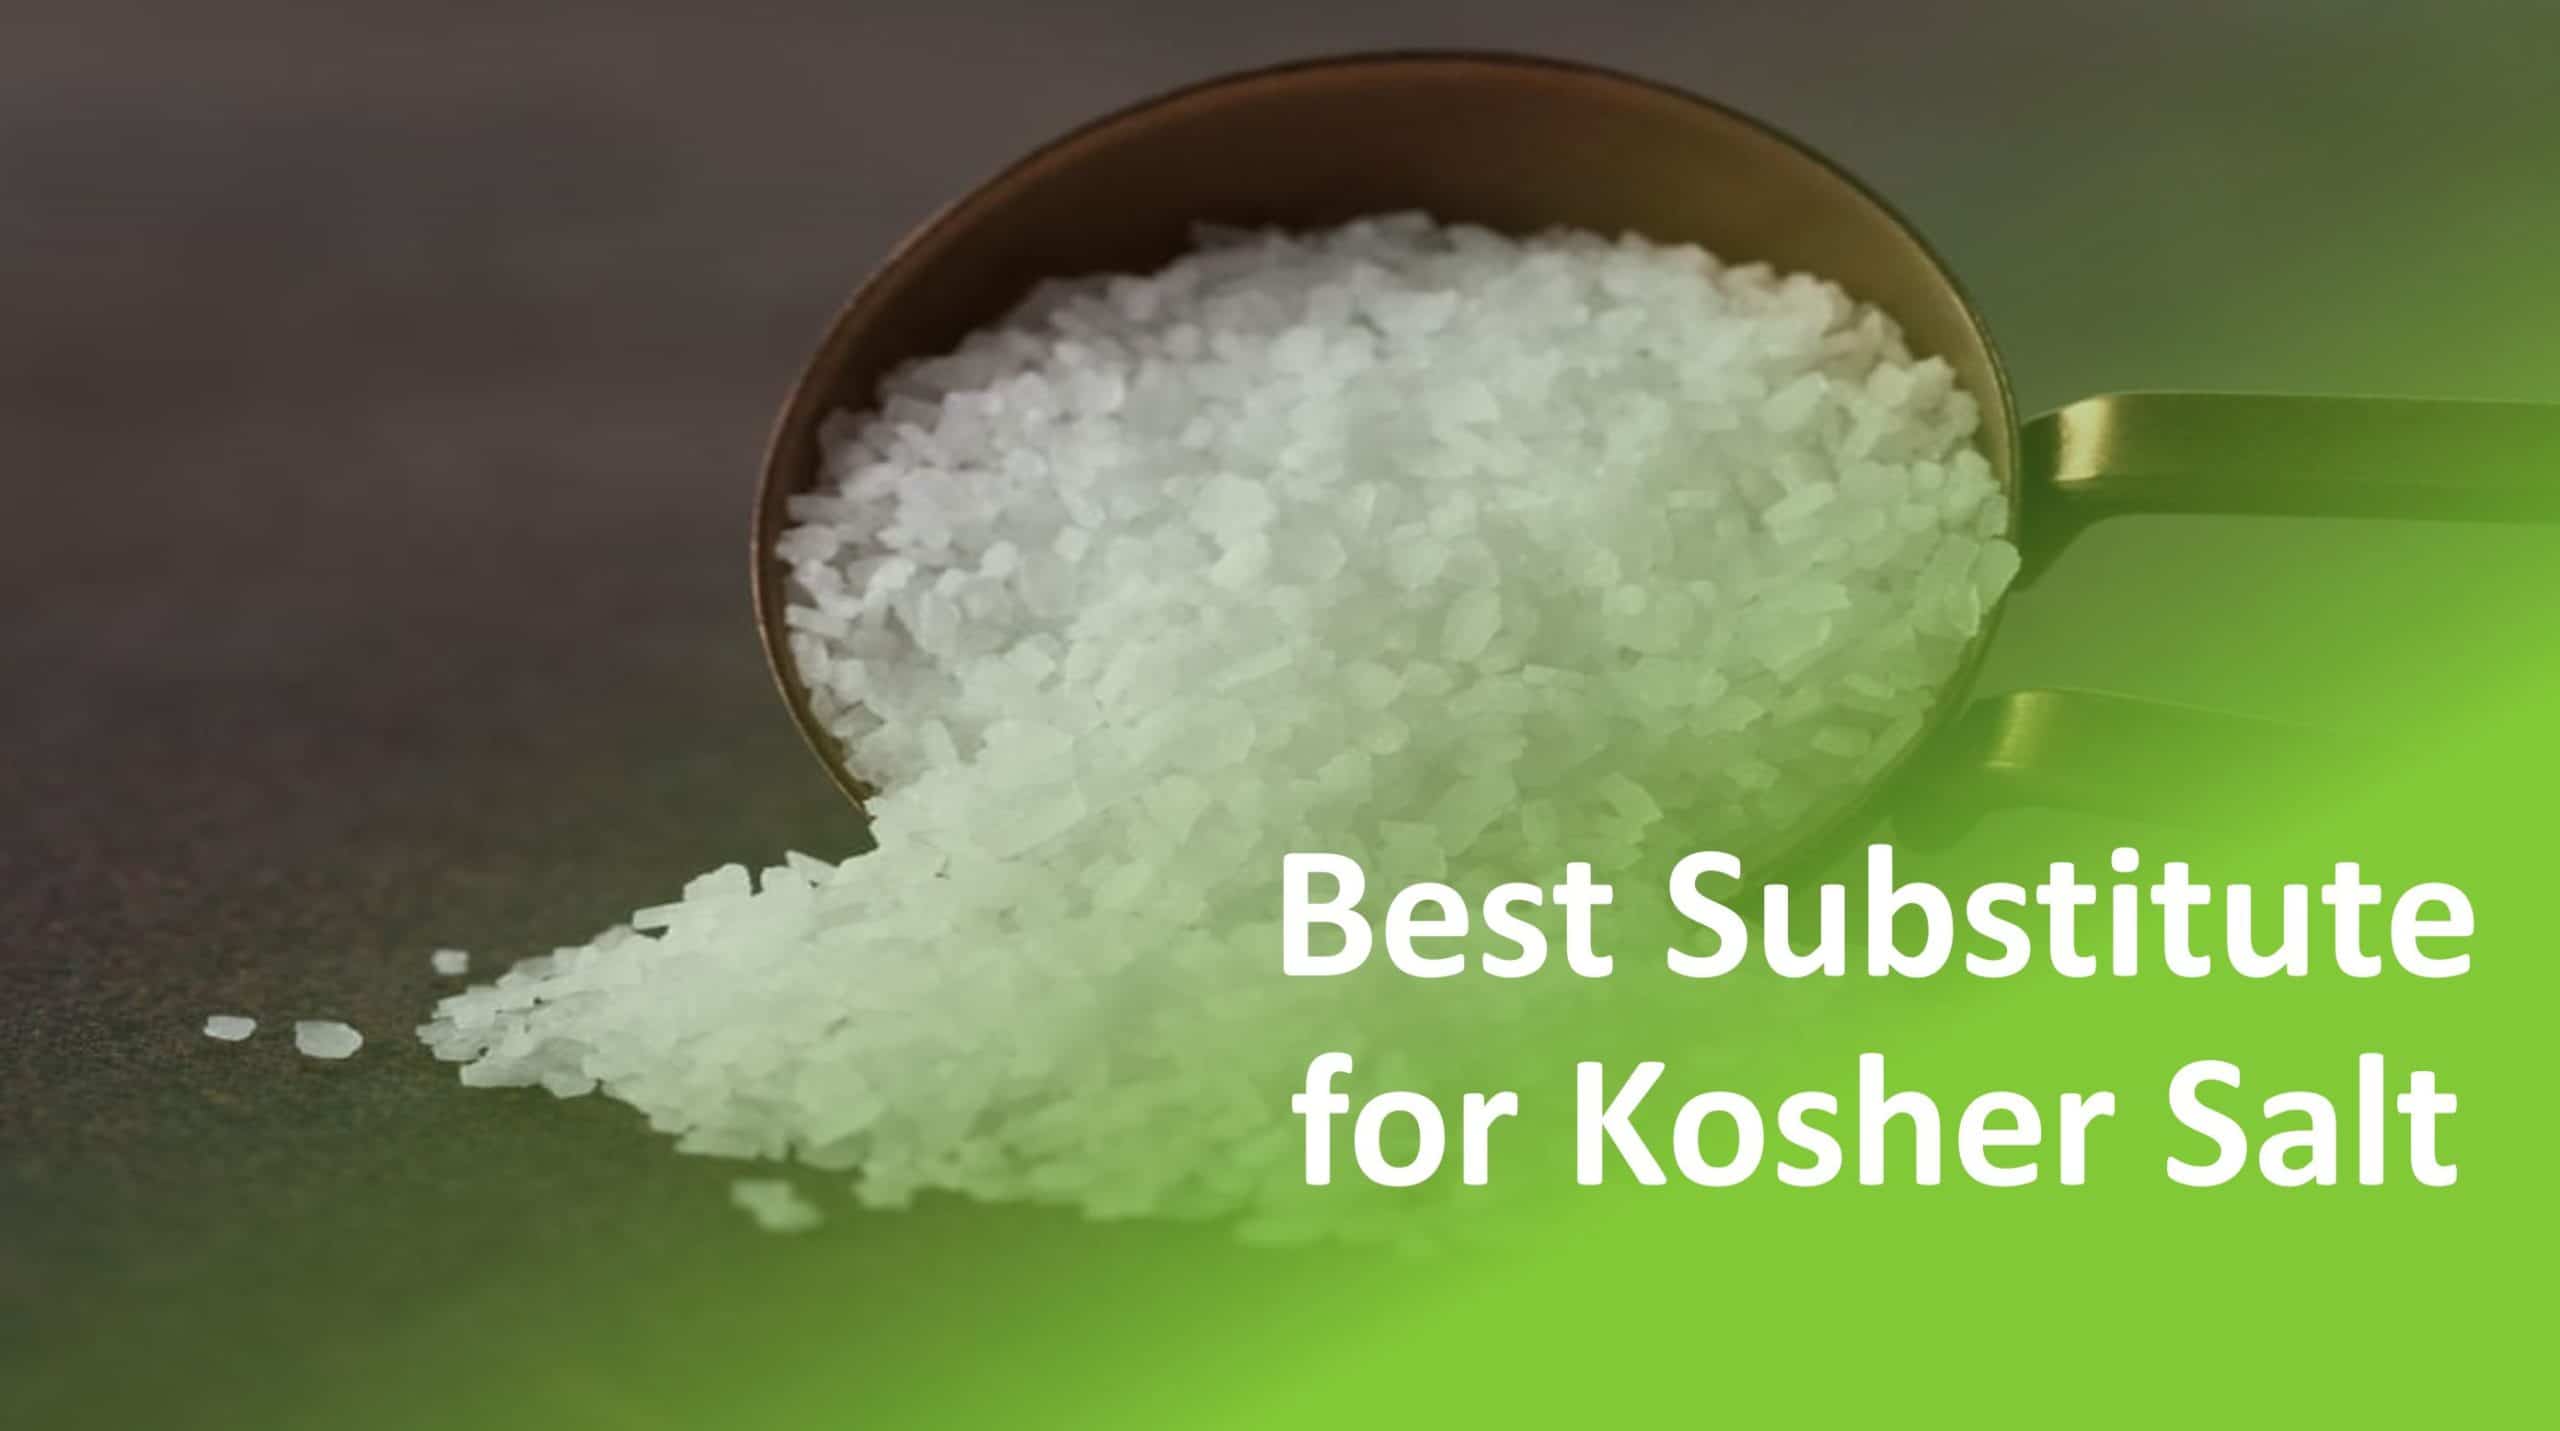 Kosher Salt Substitute: 5 Replacement With Similar Flavor & Texture